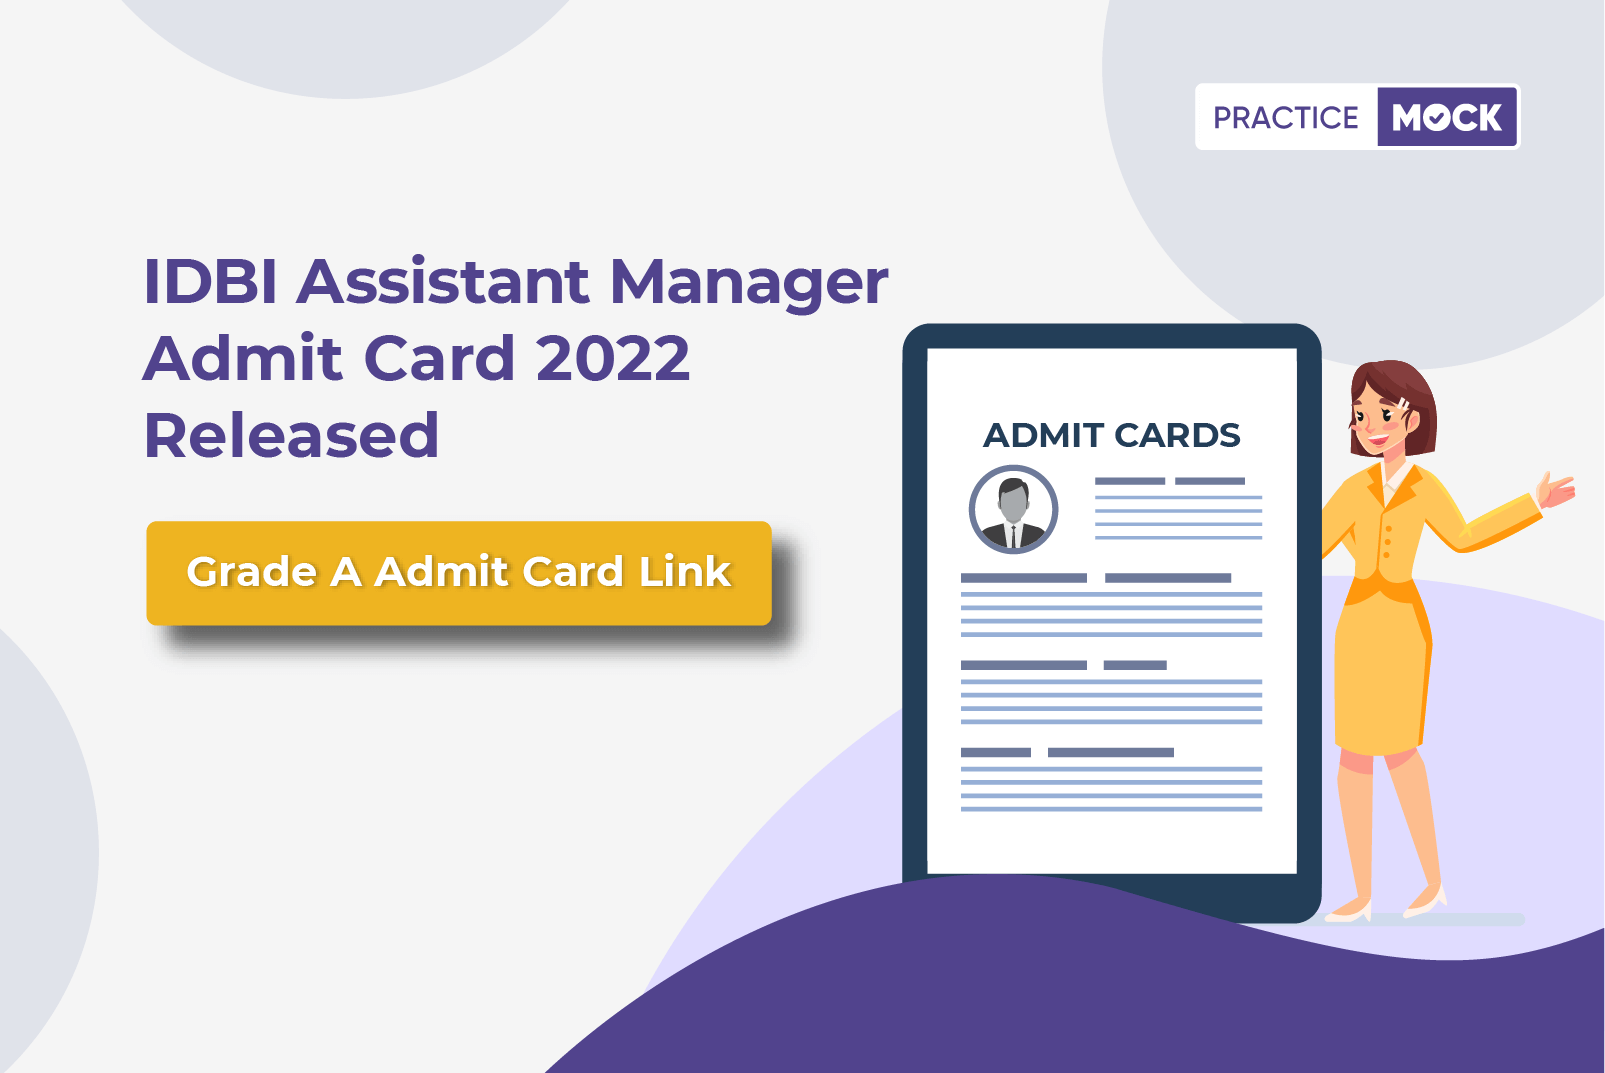 IDBI Assistant Manager Admit Card 2022 Released-Grade A Admit Card Link